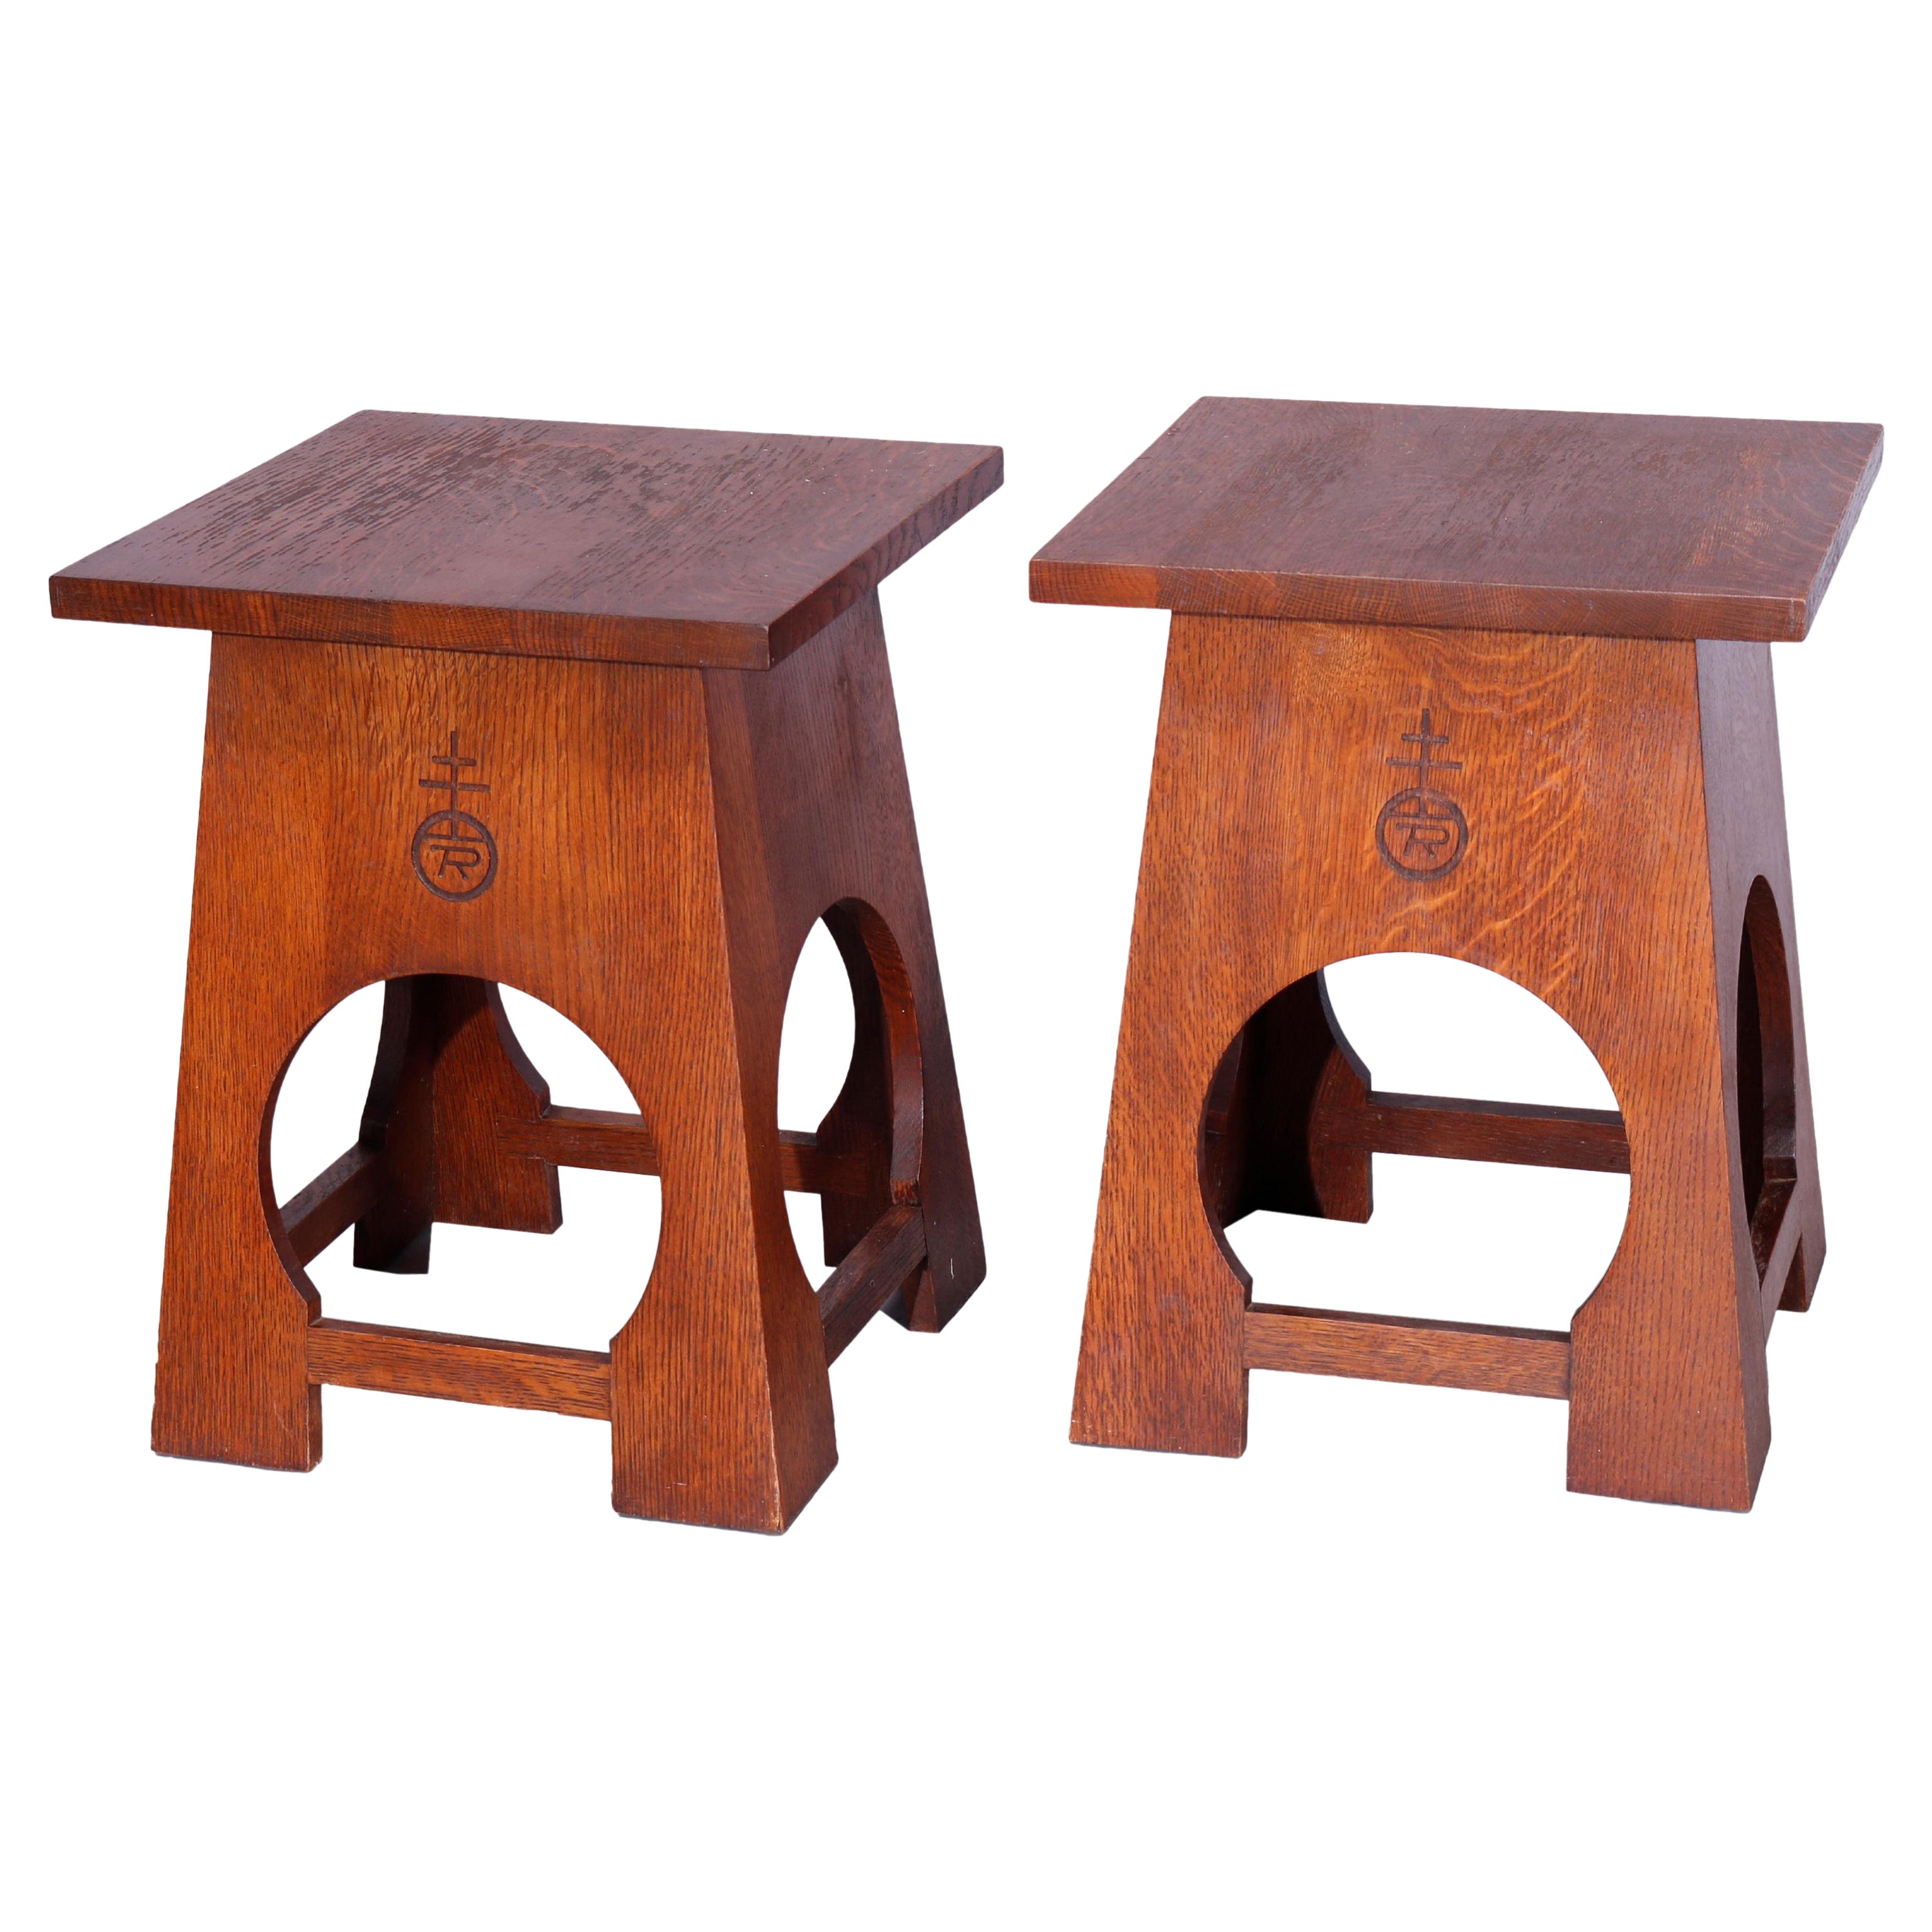 Pair of Arts & Crafts Mission Oak Tabouret Stands, Roycroft by Stickley, 20th C